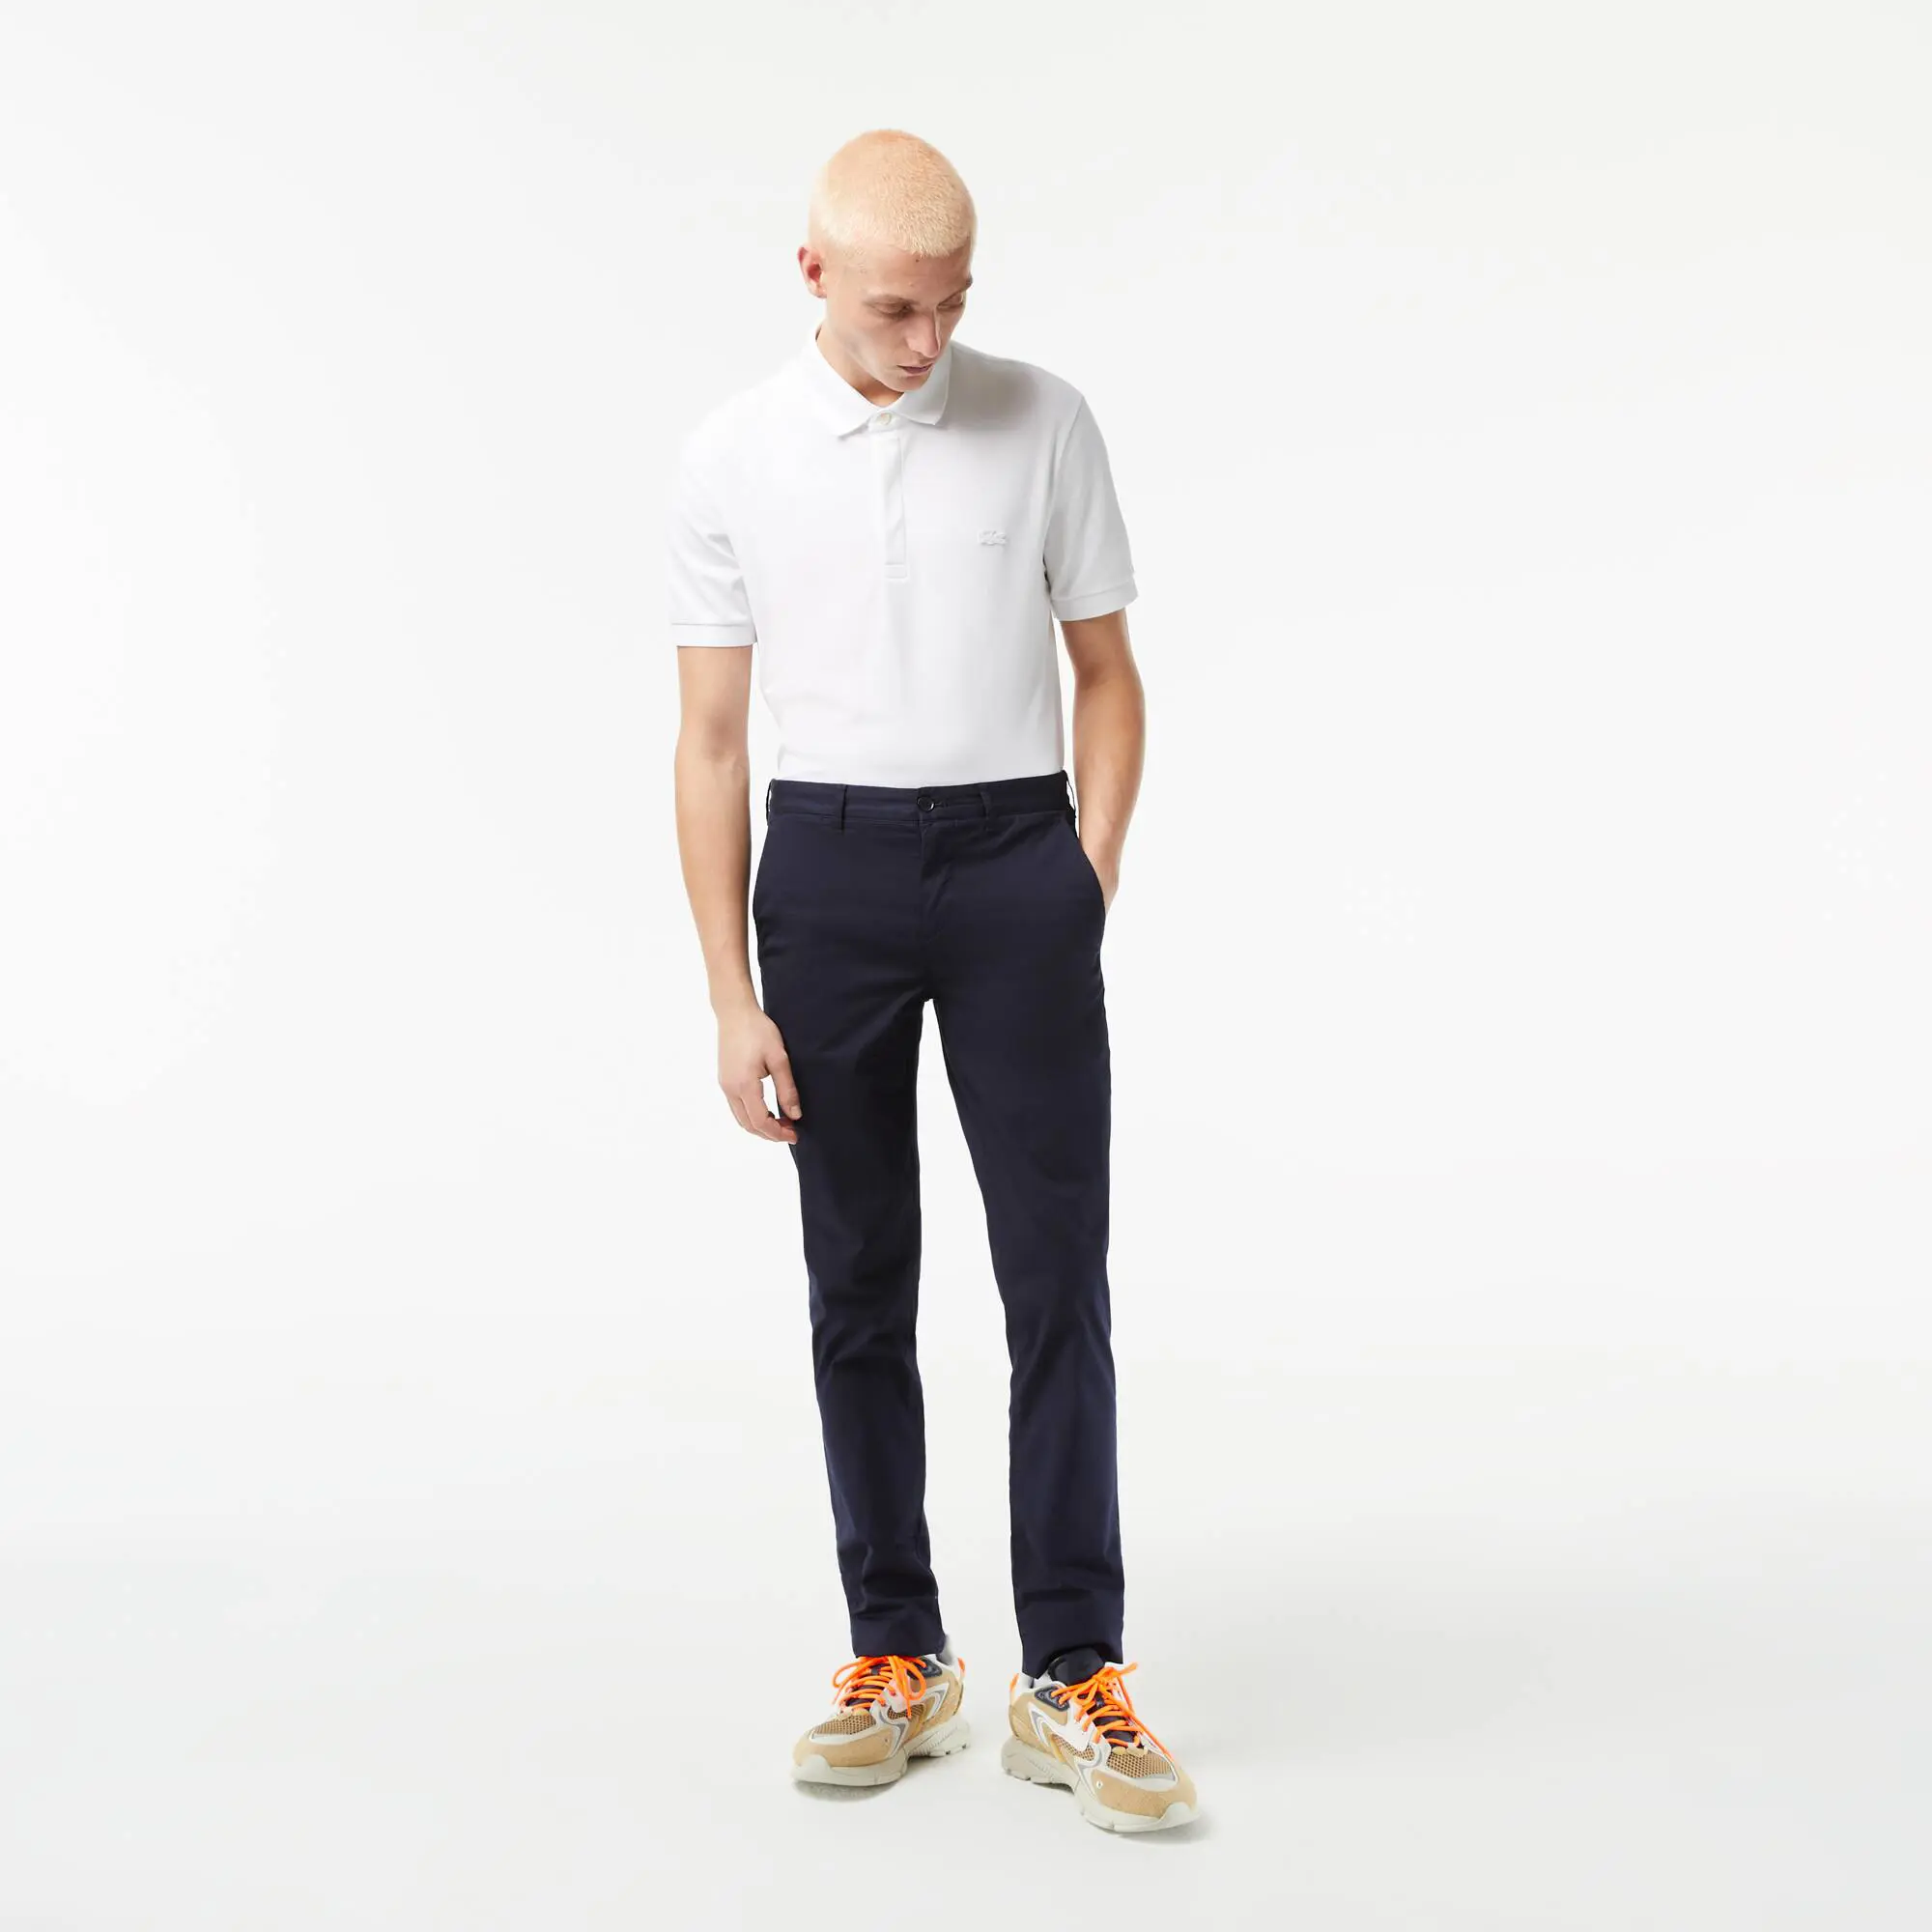 Lacoste Men's Slim Fit Stretch Cotton Chinos. 1